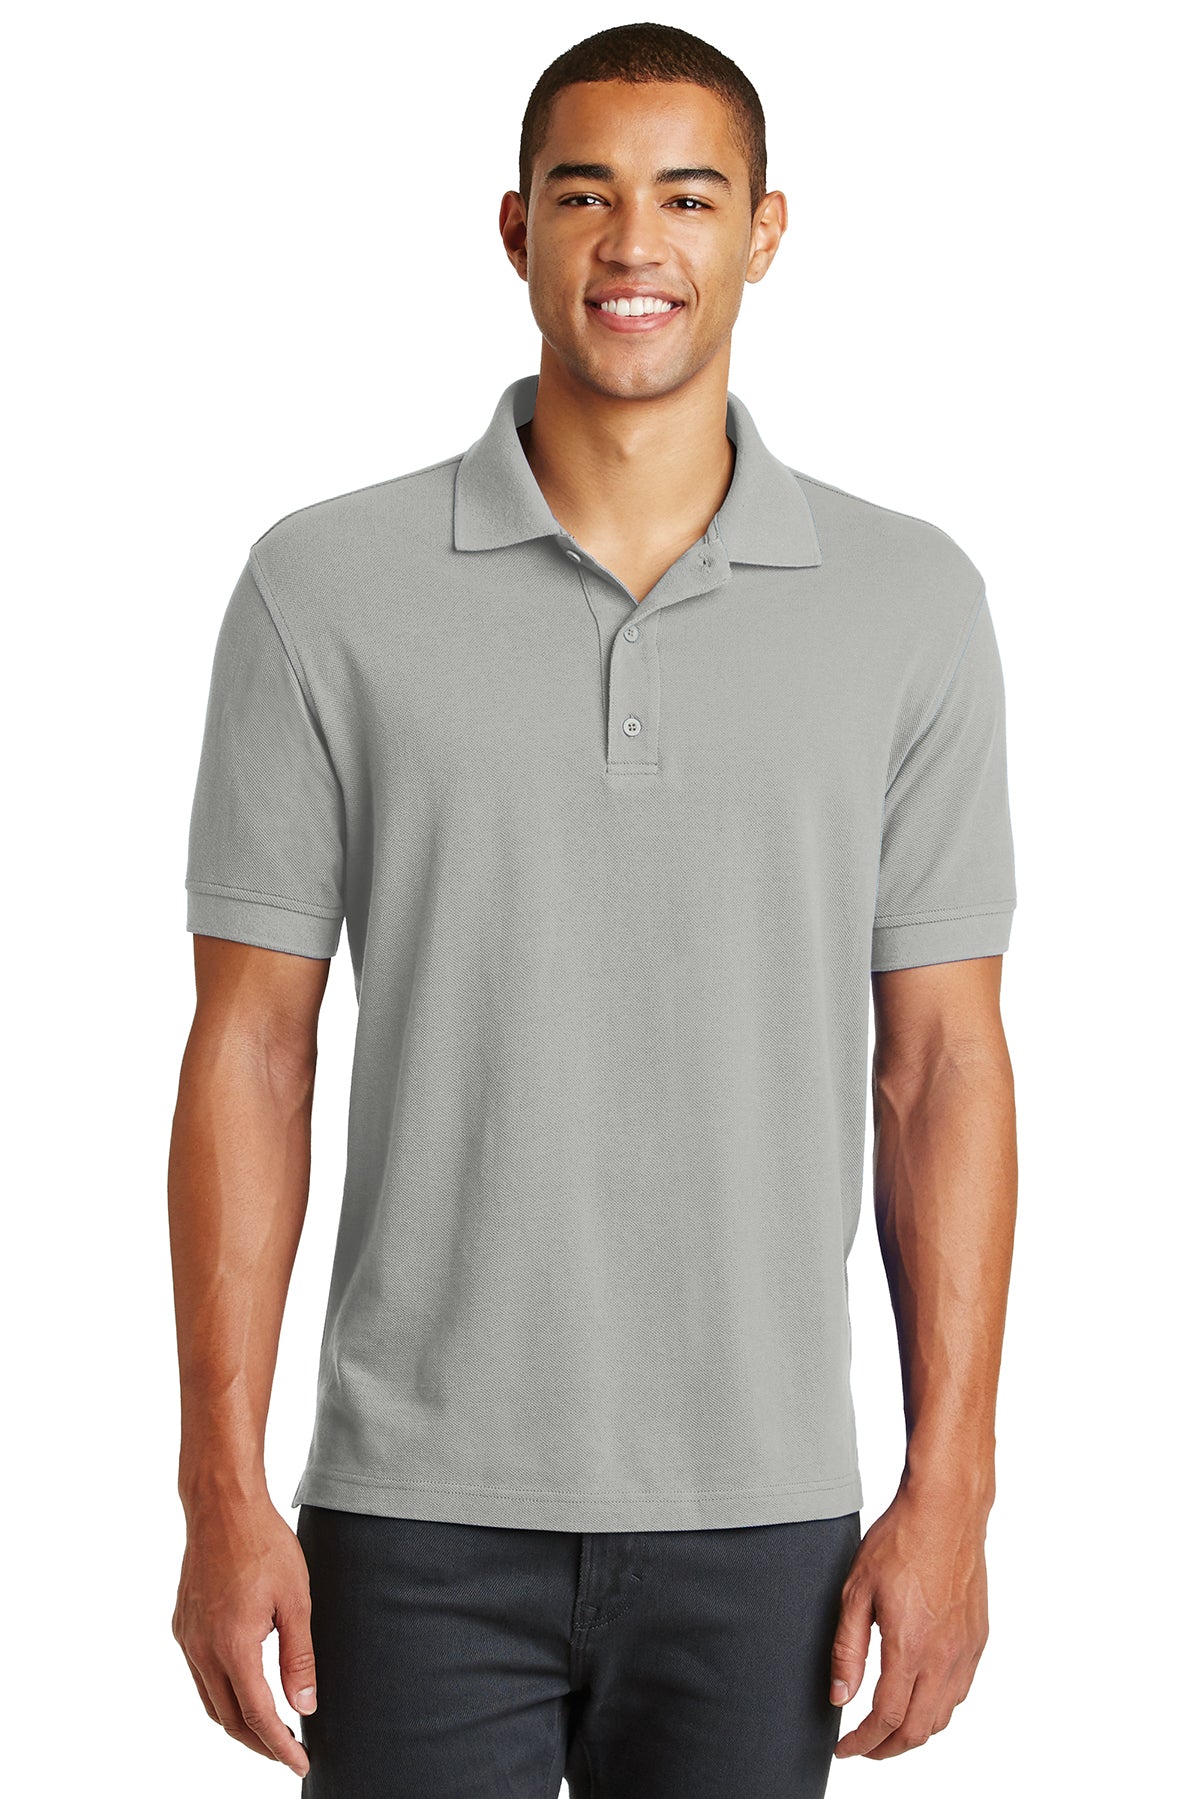 LL Two Oars (Embroidered) Eddie Bauer Golf Polo